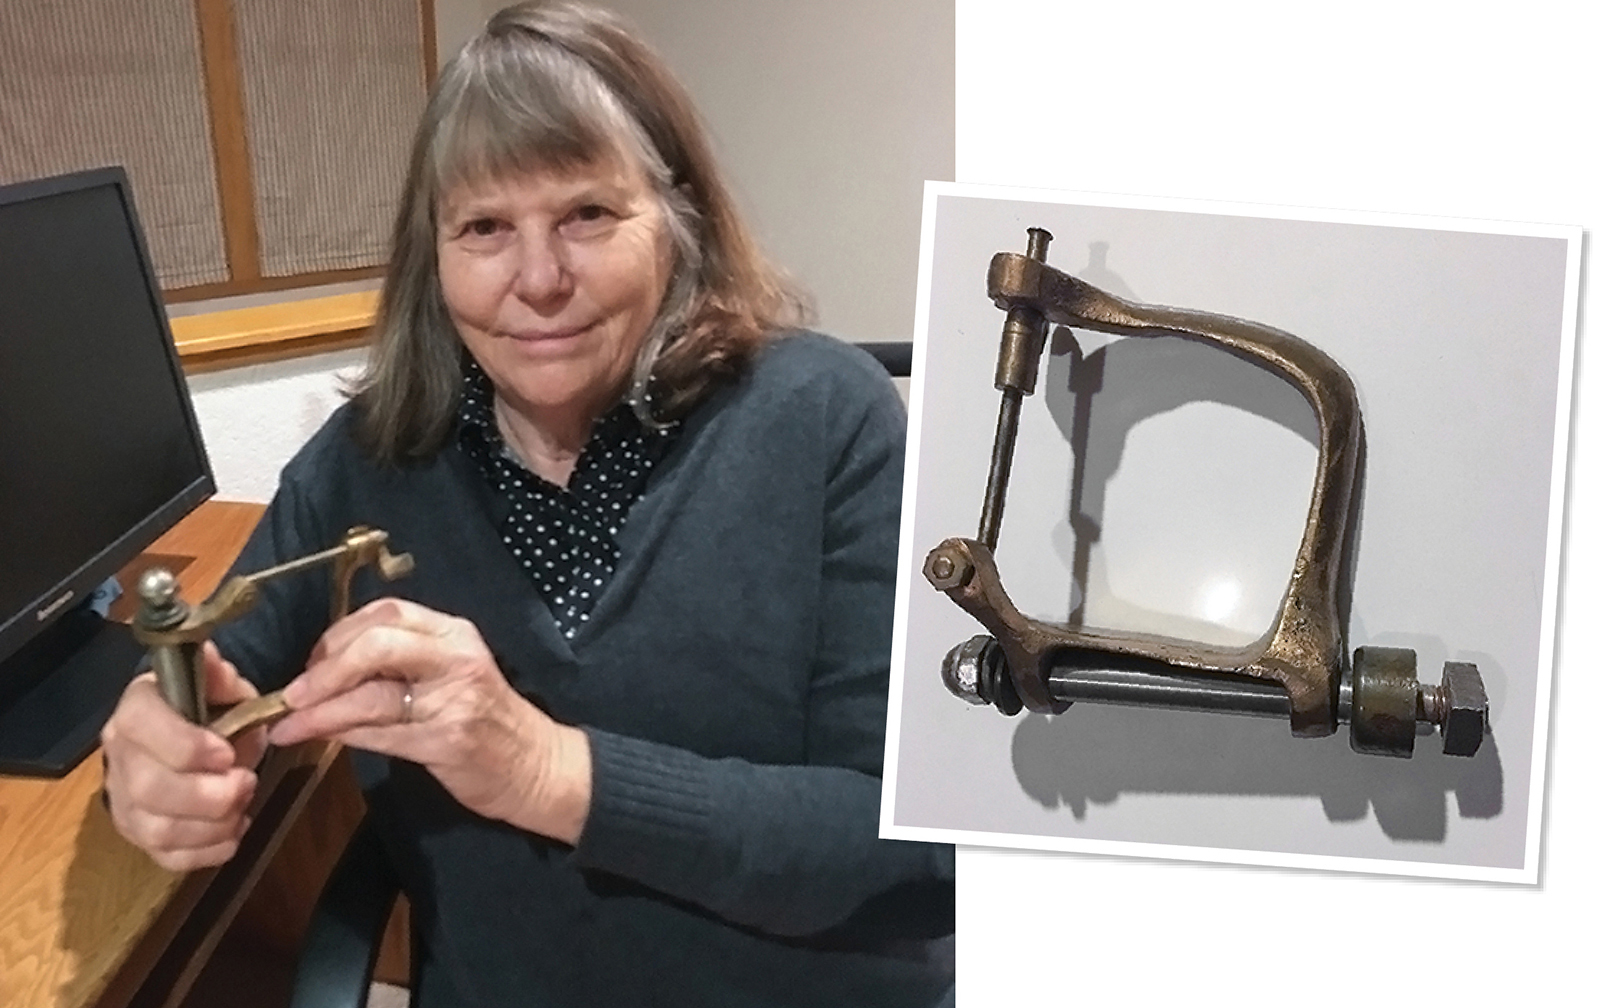 A photo of MIT alum Diane Marie McKnight holding a bronze oarlock (left) and a close up of the oarlock (right)